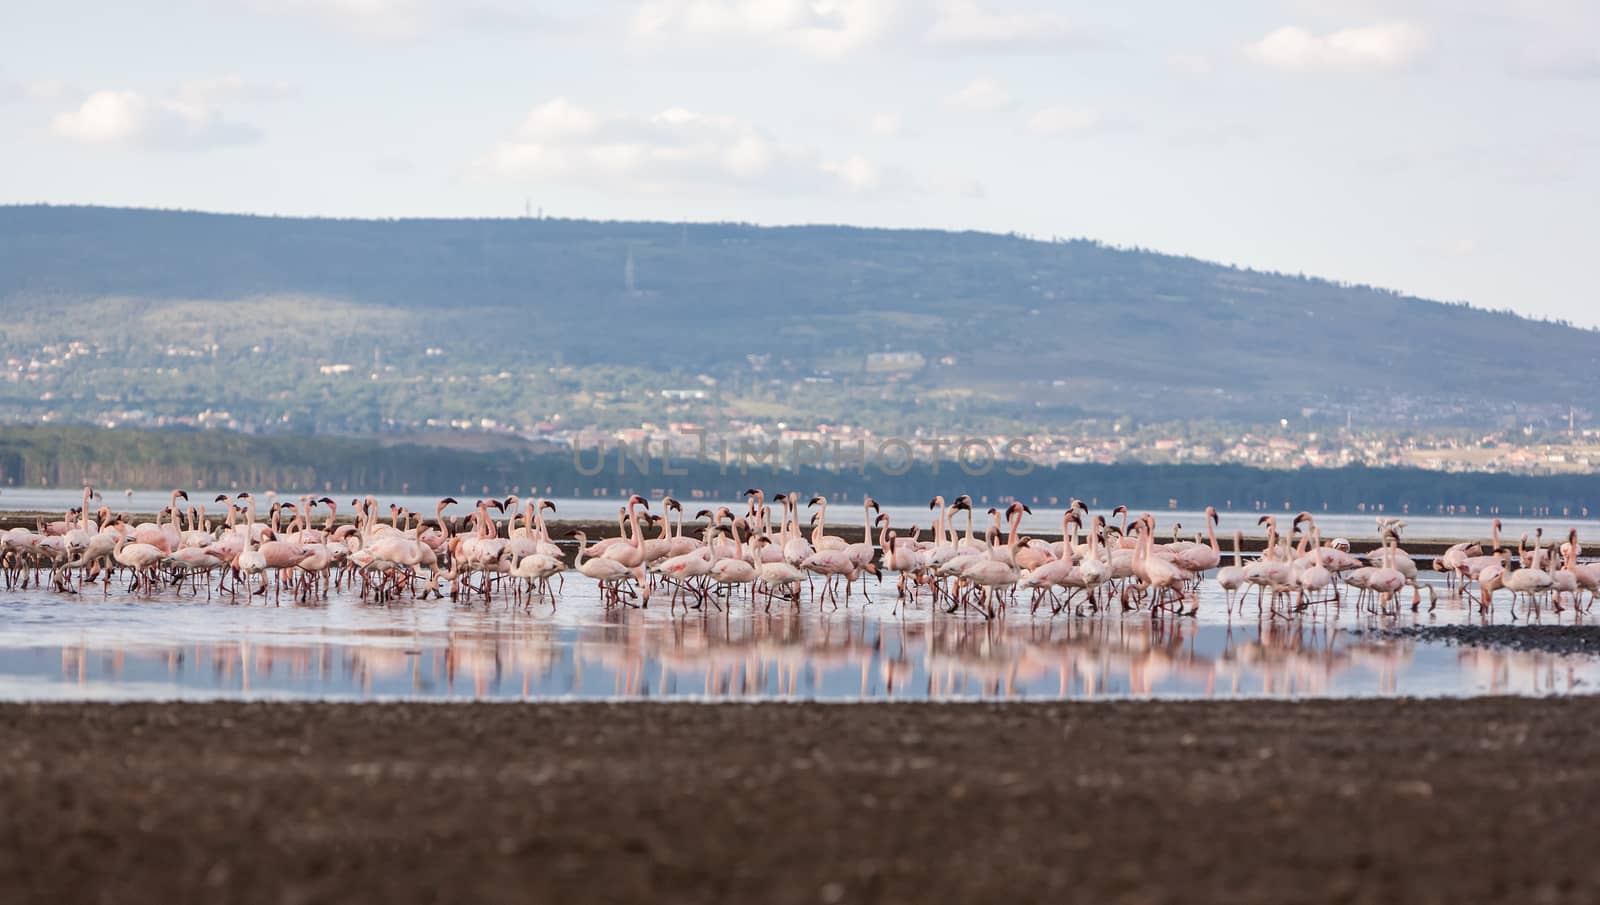 Flock of greater flamingos  by master1305